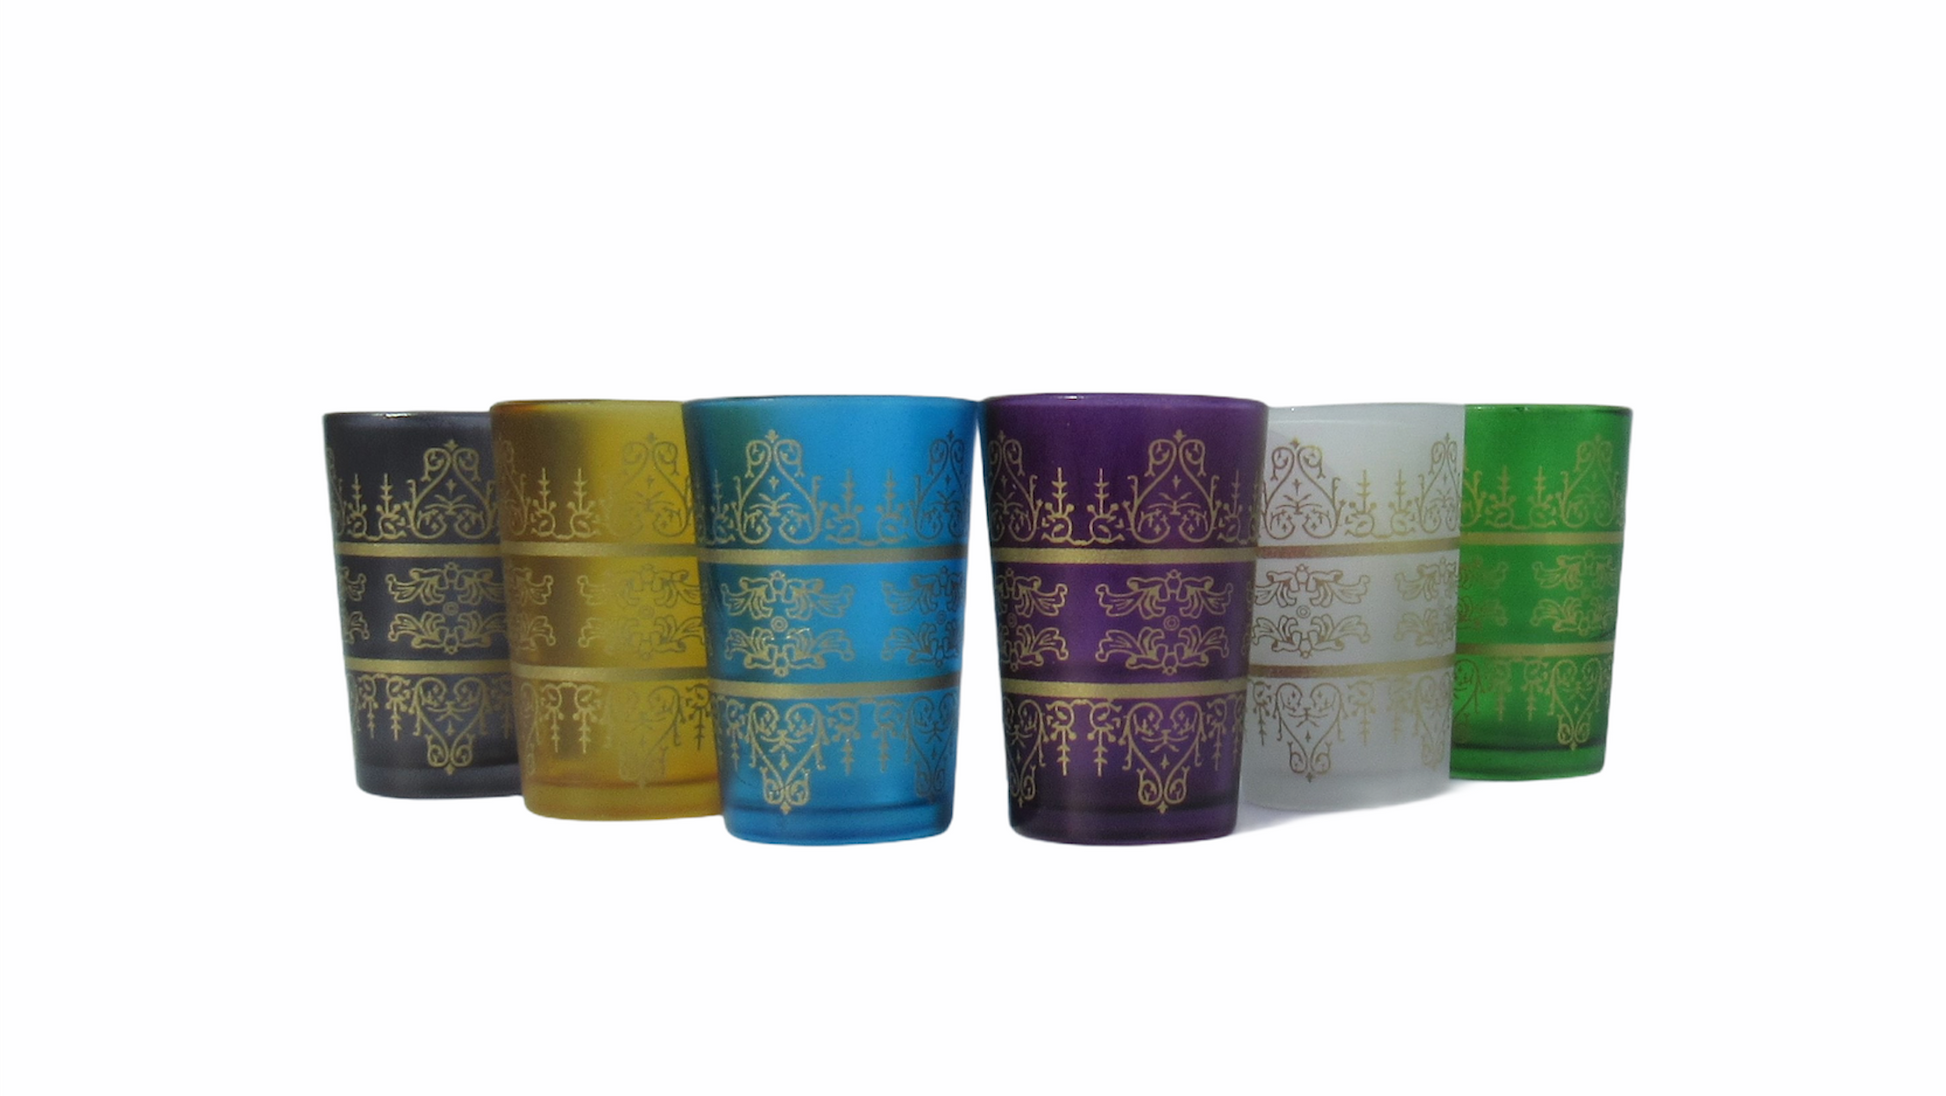 Royal Moroccan Tea Glasses, Moroccan Drinking Glasses – Pack Of 6